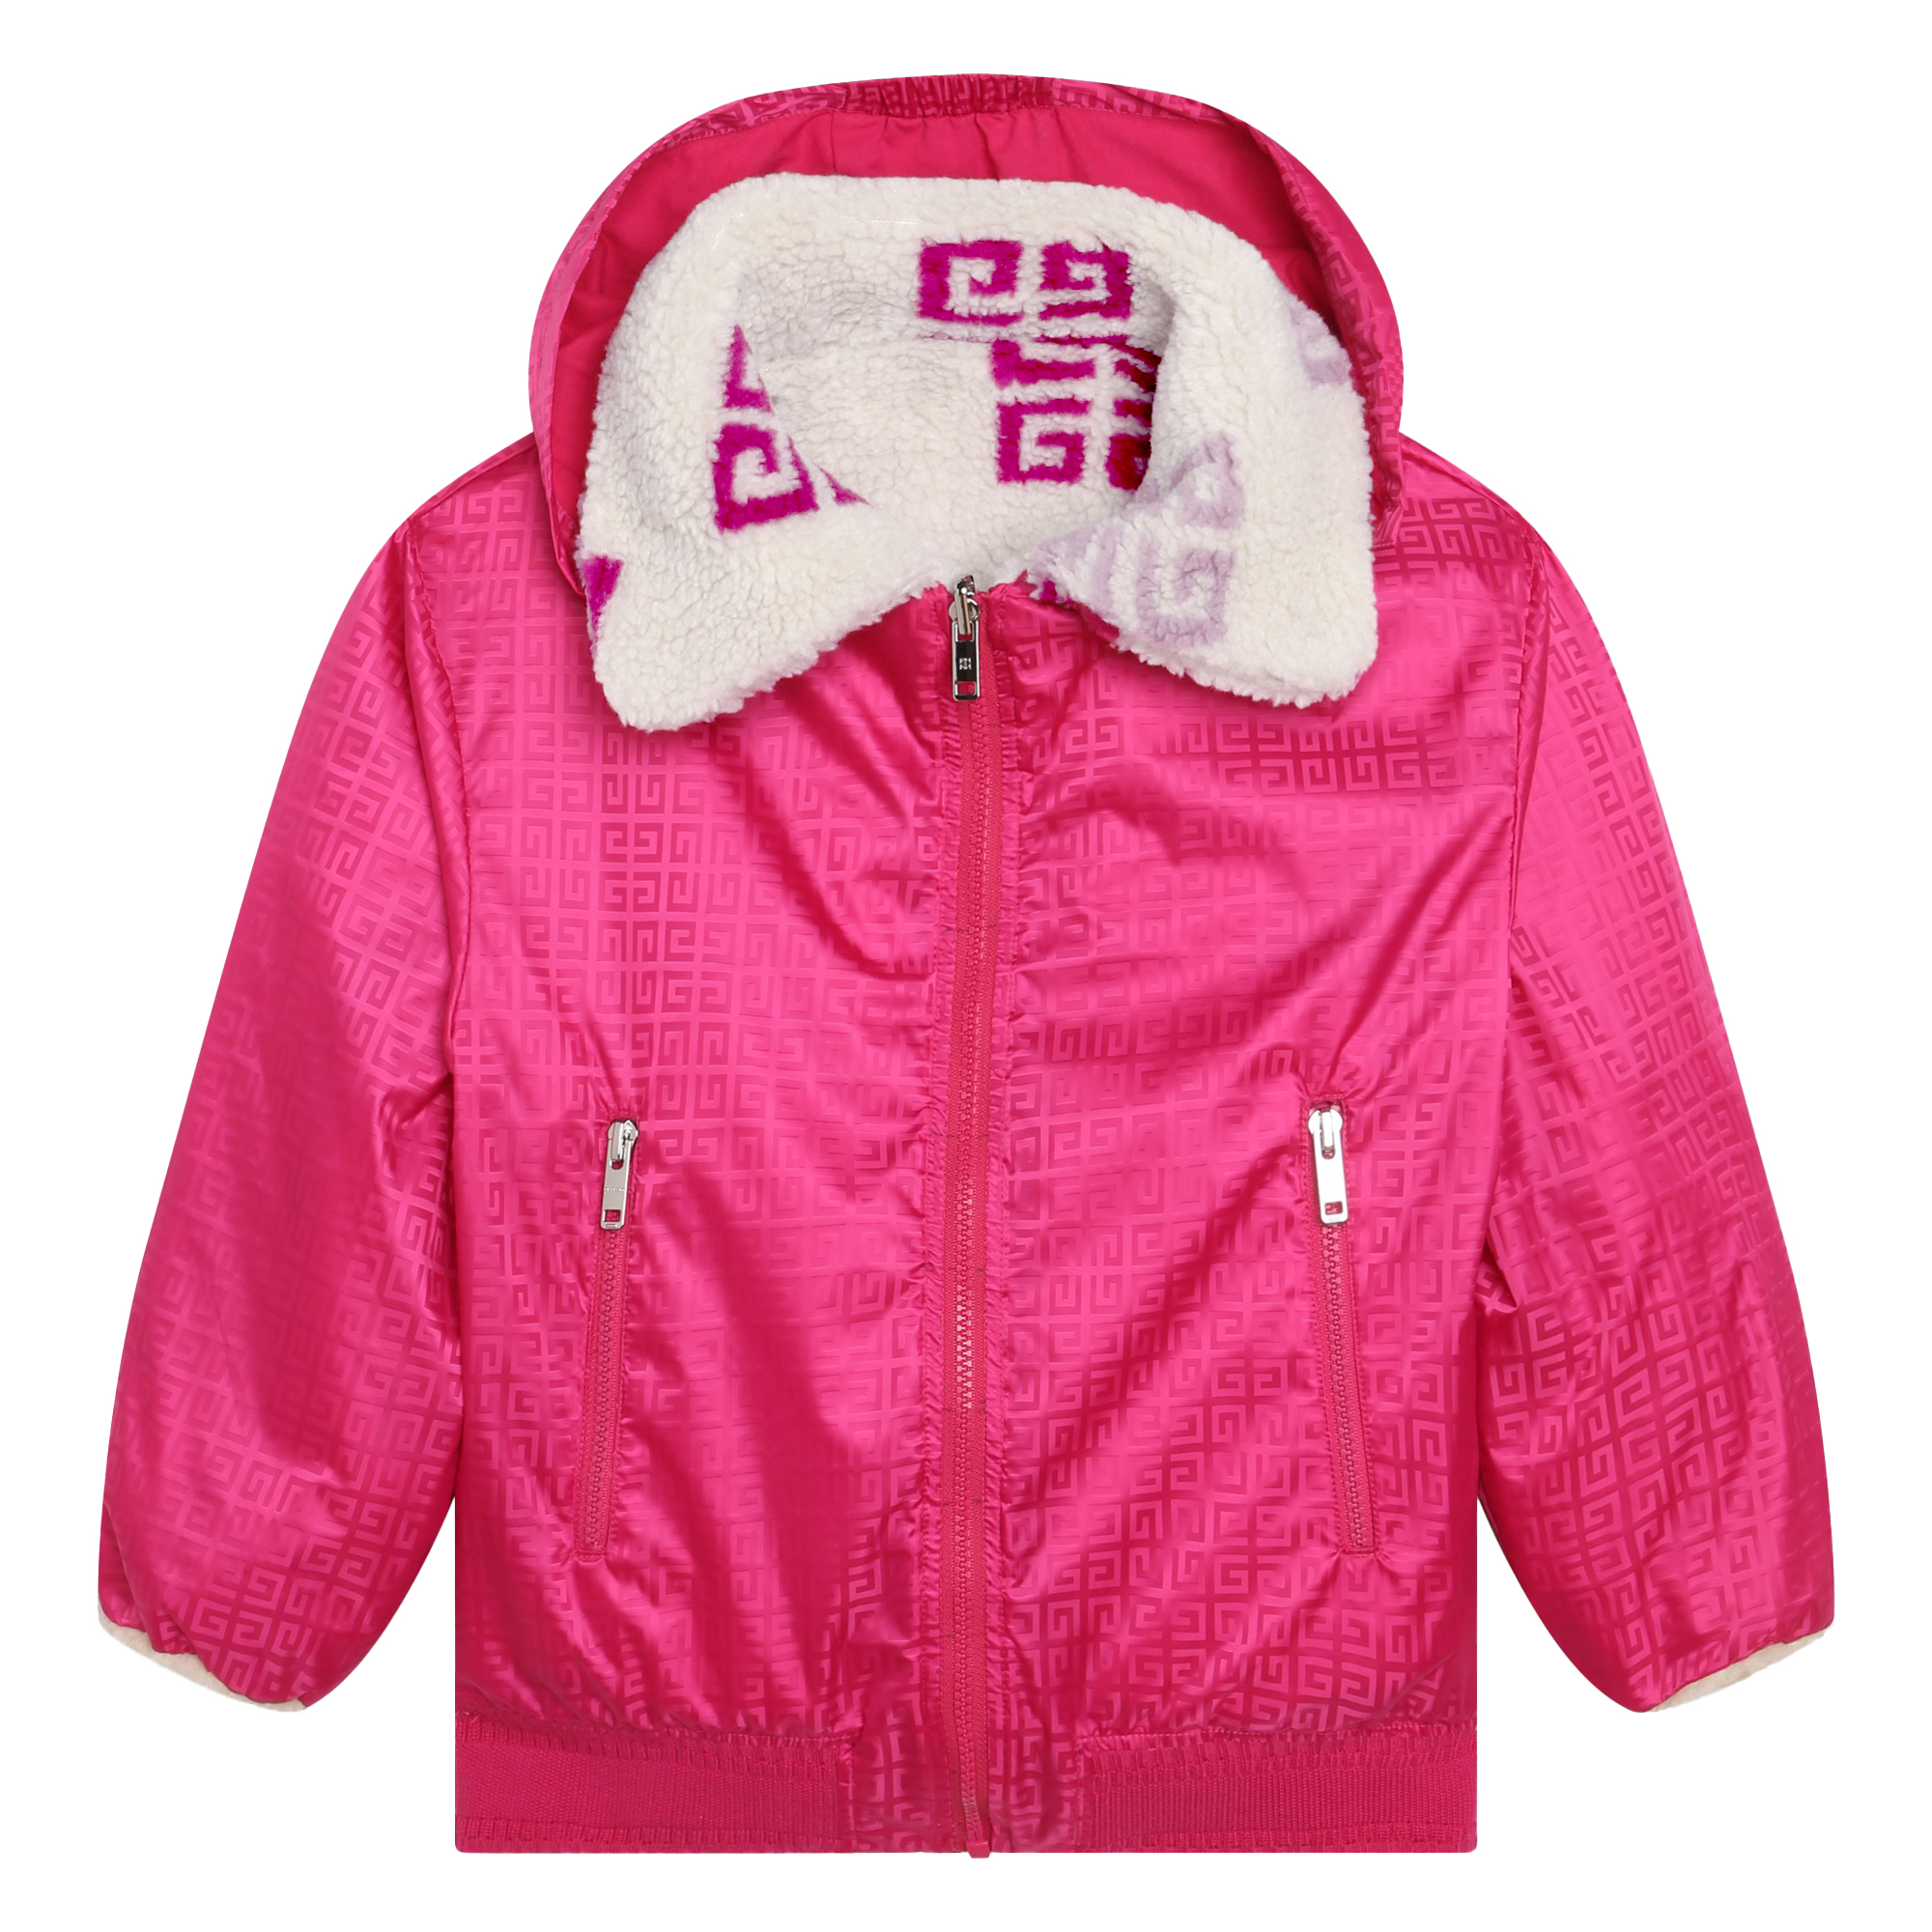 Reversible hooded jacket GIVENCHY for GIRL